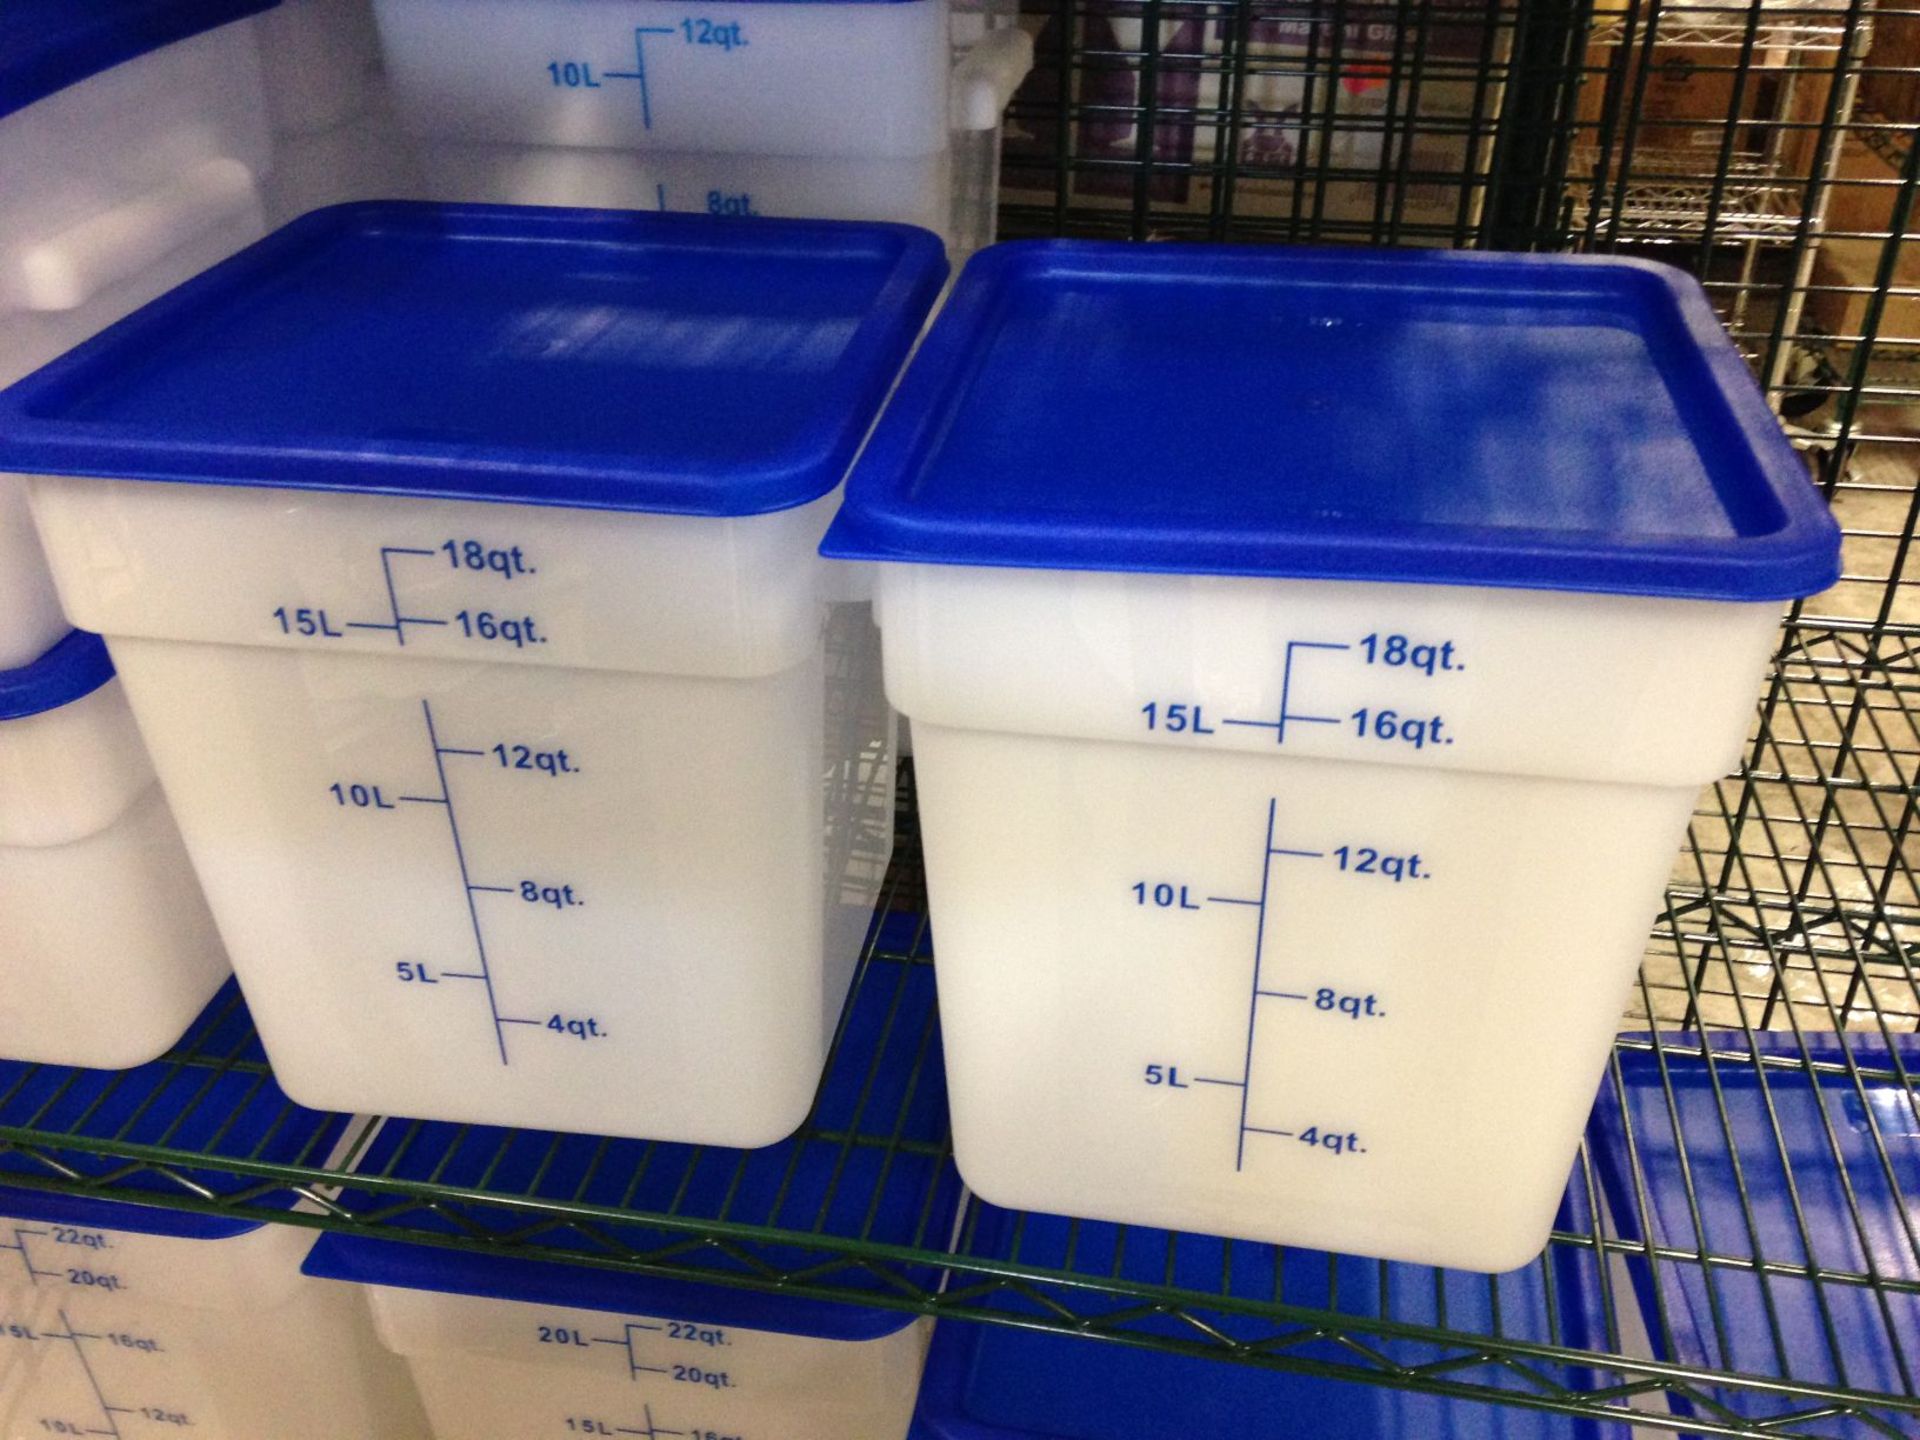 18qt Ingredient Bins with Lids - Lot of 2